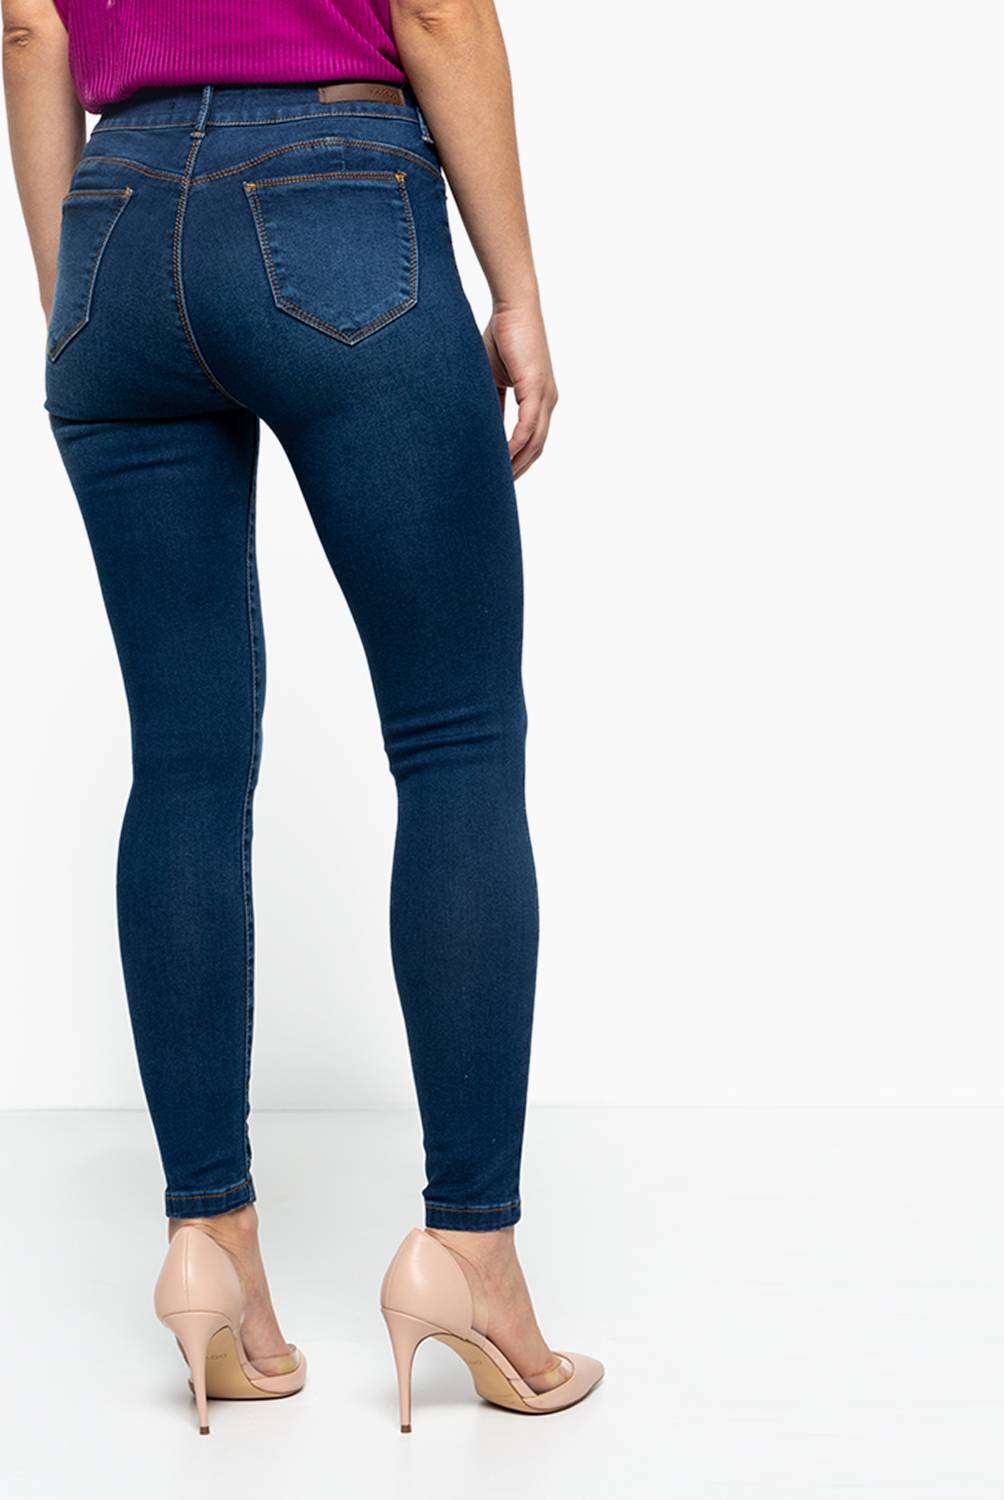 MOSSIMO - Jeans Mujer